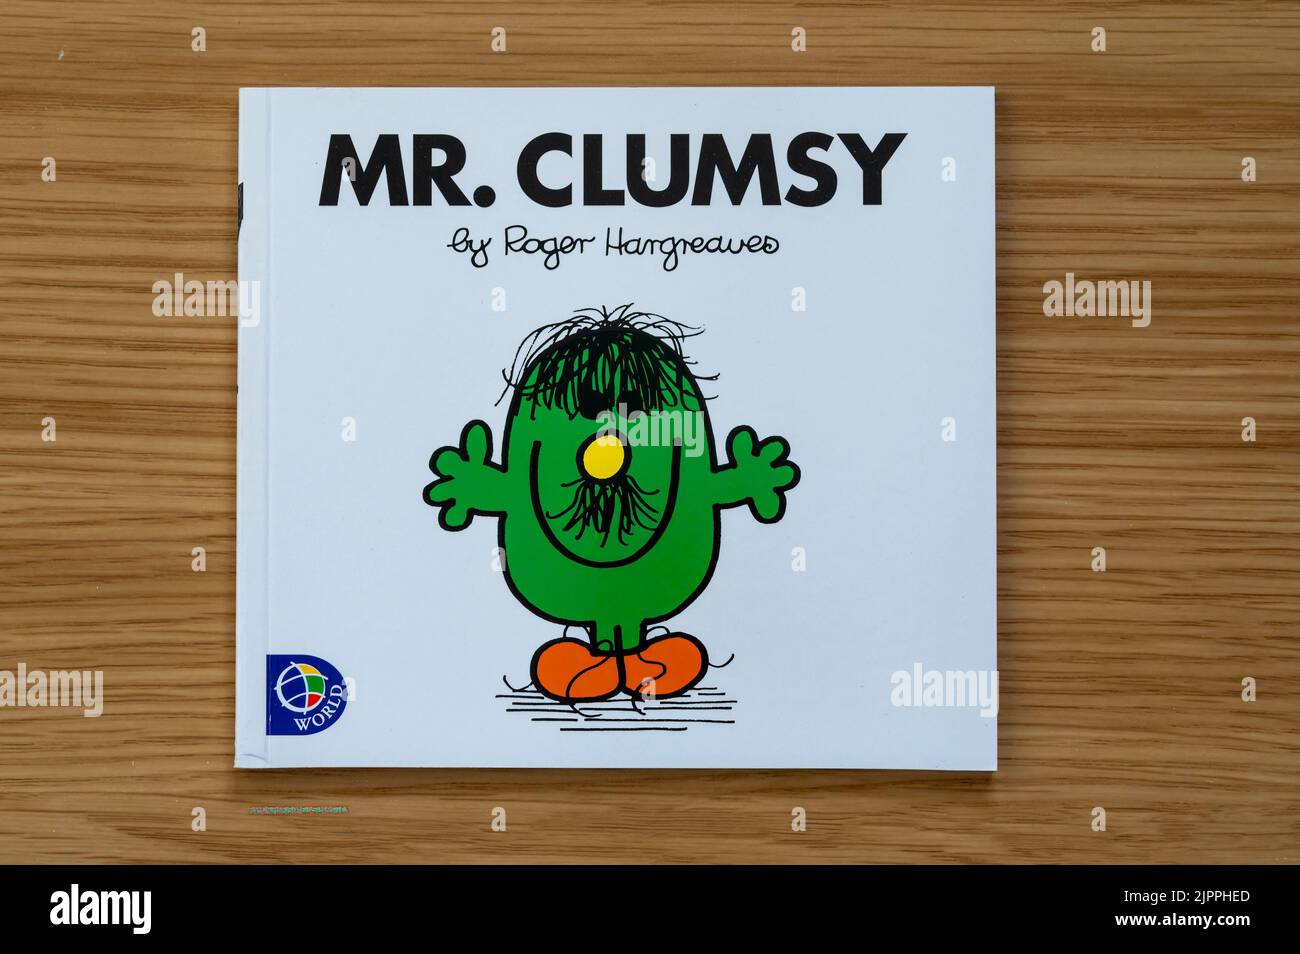 CHESTER, UNITED KINGDOM - JULY 31ST 2022: Mr Clumsy, front cover of Mr Men series of books Stock Photo